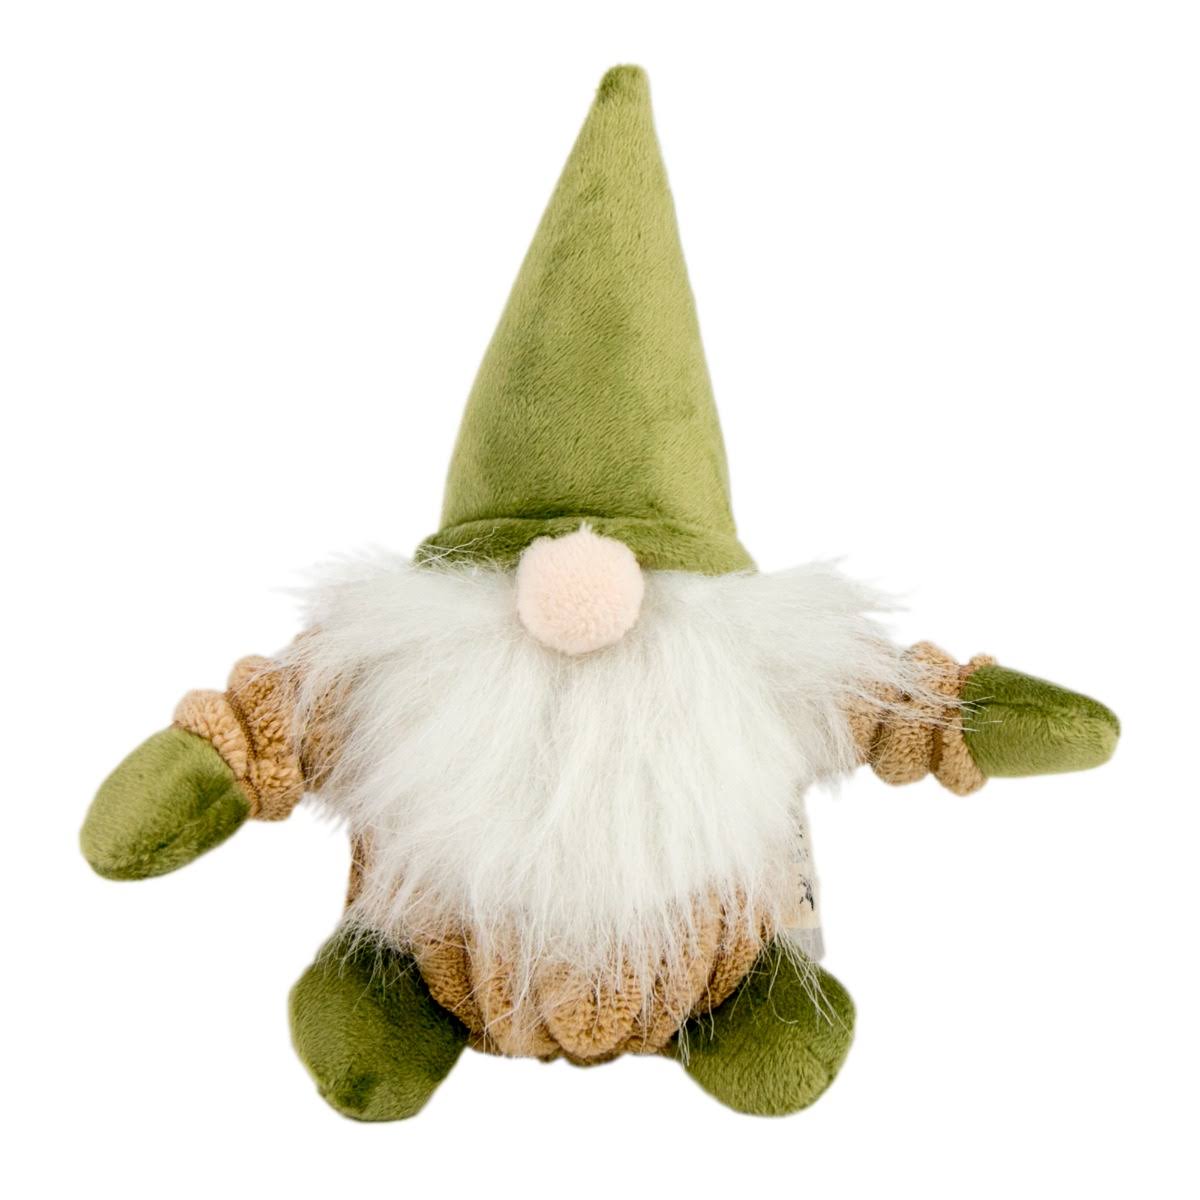 Tall Tails 7" Gnome Plush Toy